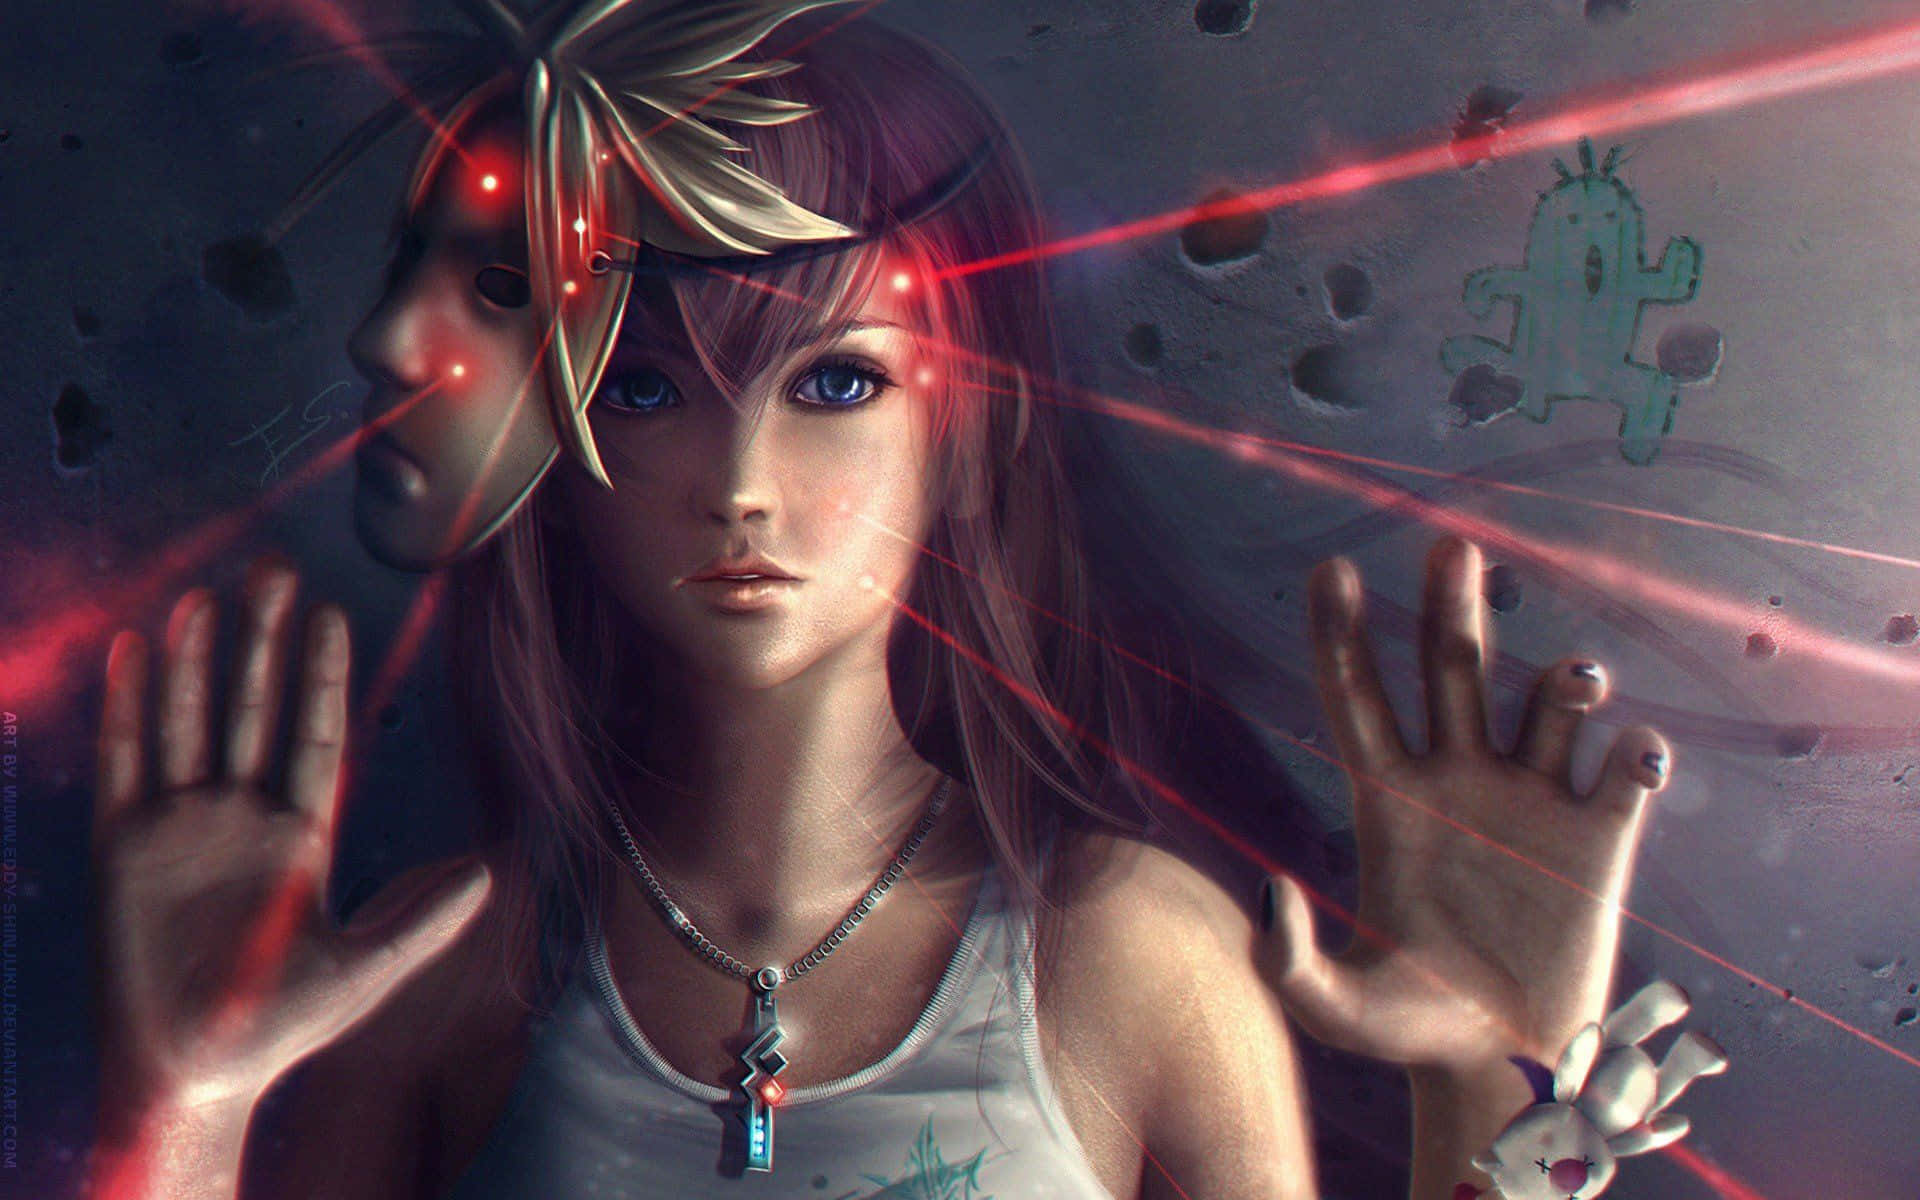 Lightning, Protagonist Of Final Fantasy Xiii, In The Heat Of Action Wallpaper